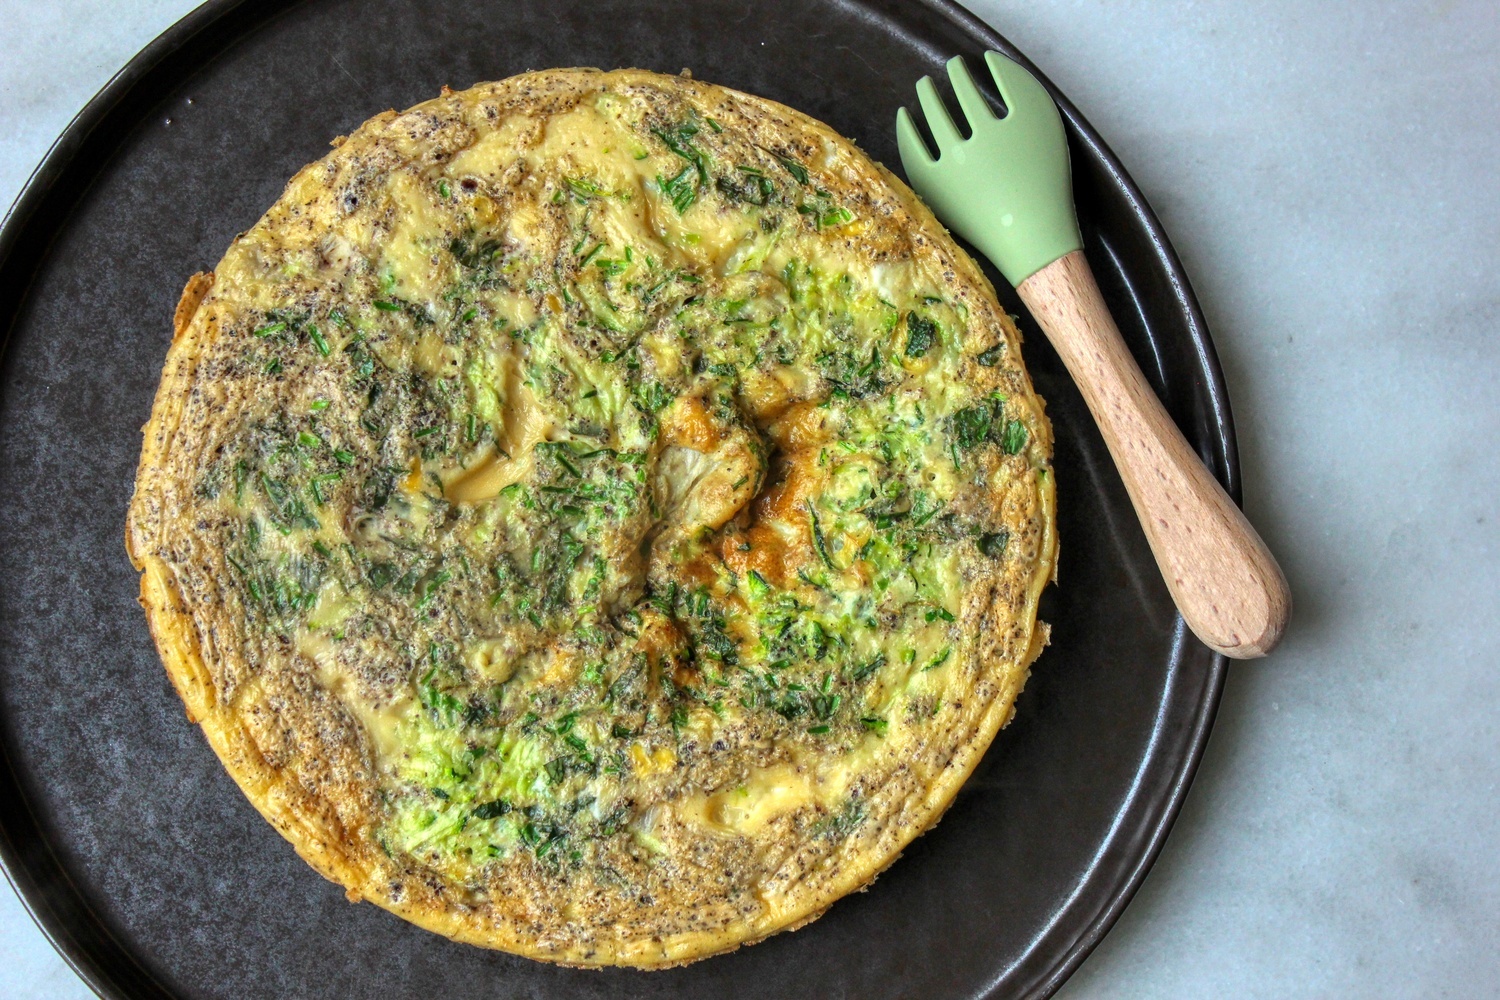 Courgette herb frittata